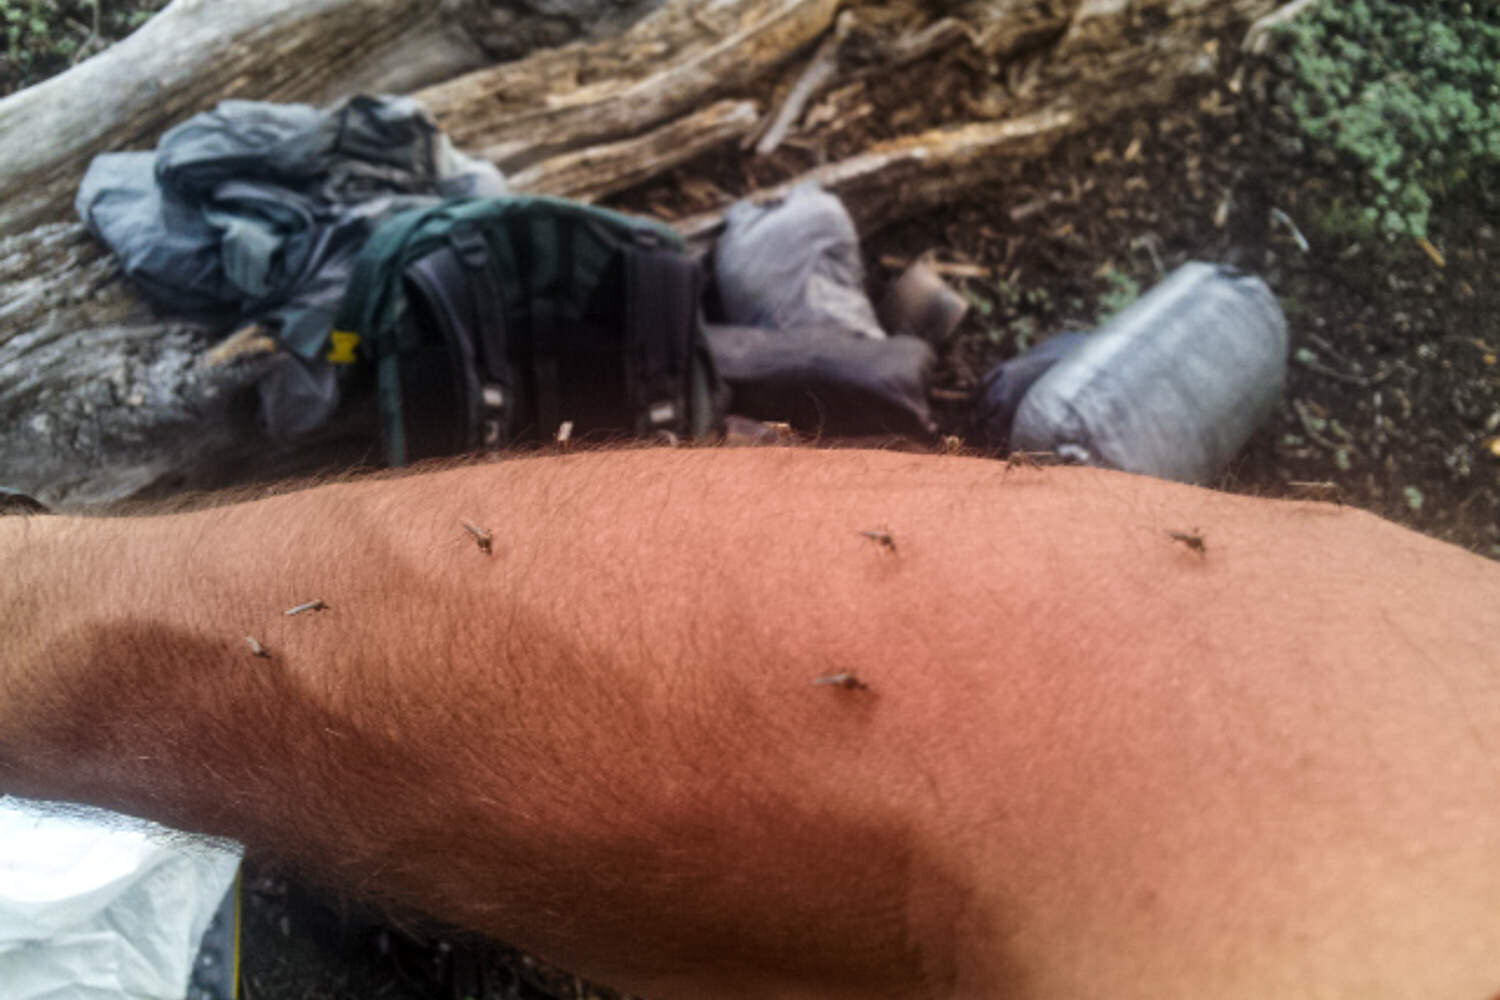 MOSQUITOES feast on “coincidence’s” arm in the sierra